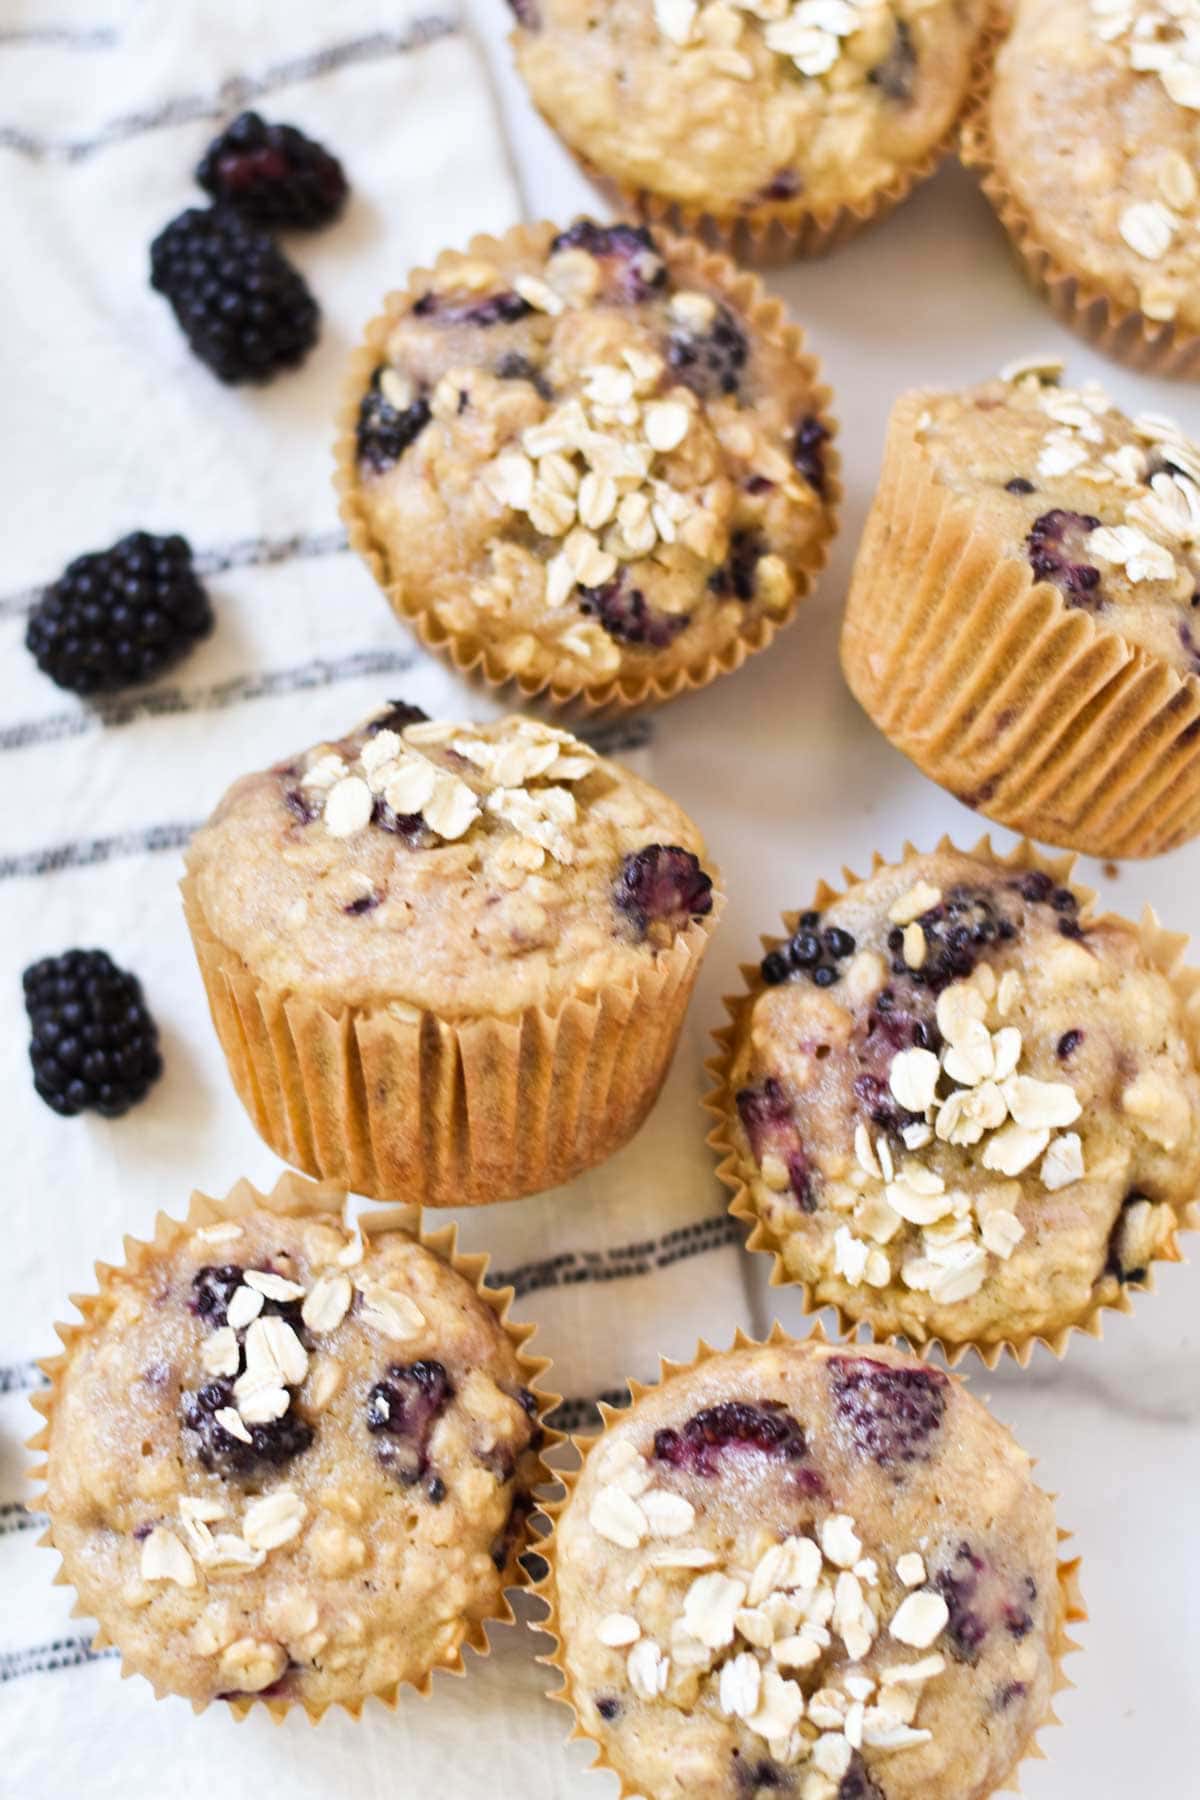 Side view of muffins with blackberries and oats.